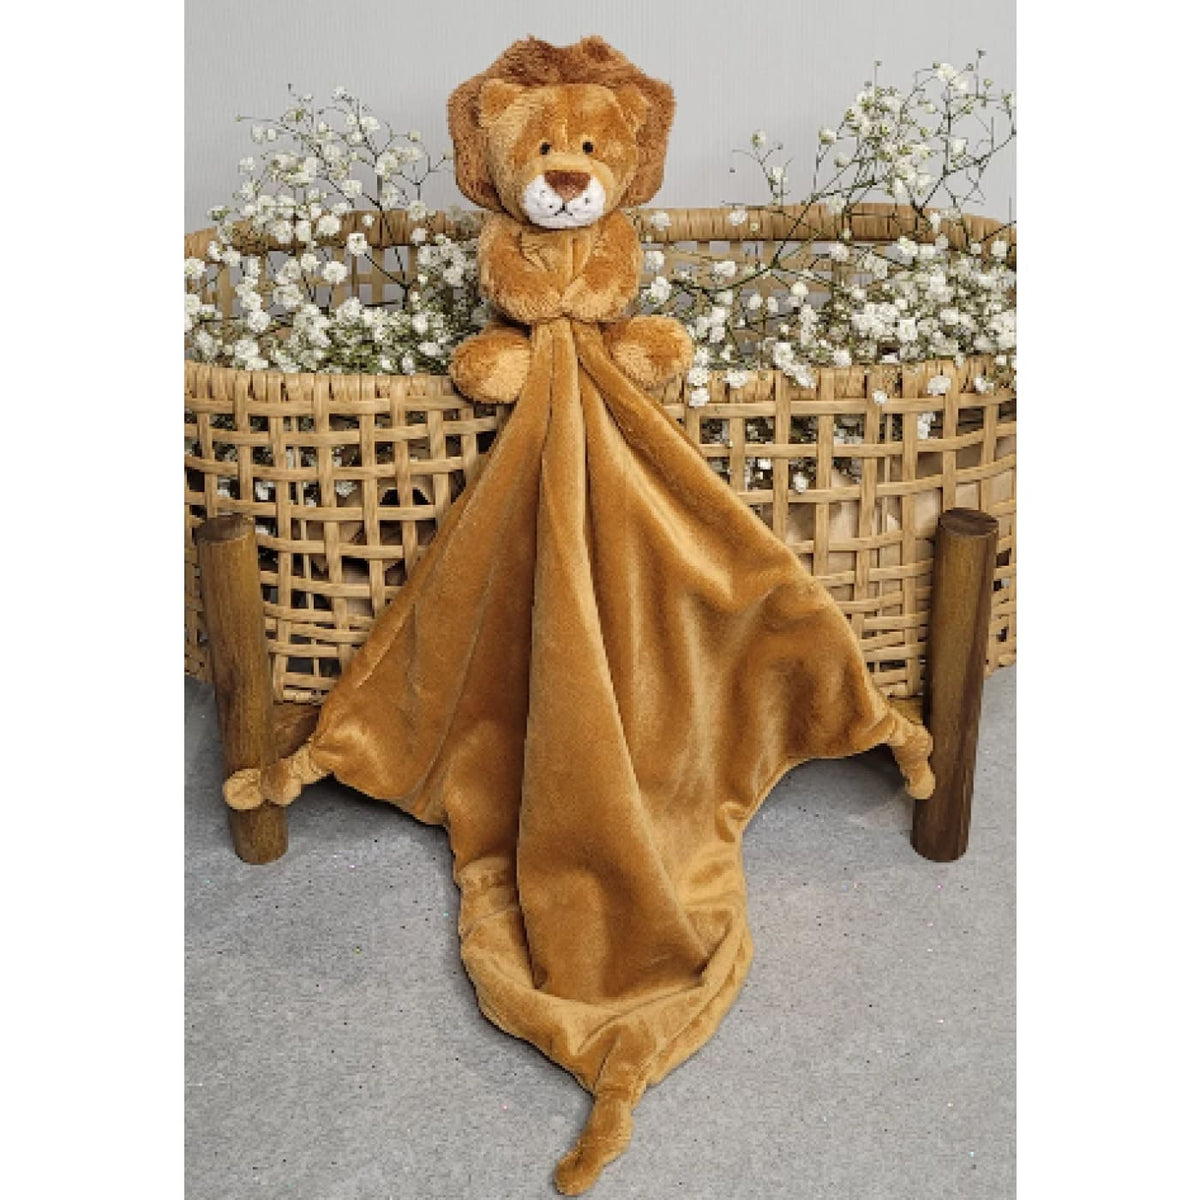 Petite Vous Comfort Blanket Lewis the Lion - Lion - TOYS &amp; PLAY - BLANKIES/COMFORTERS/RATTLES